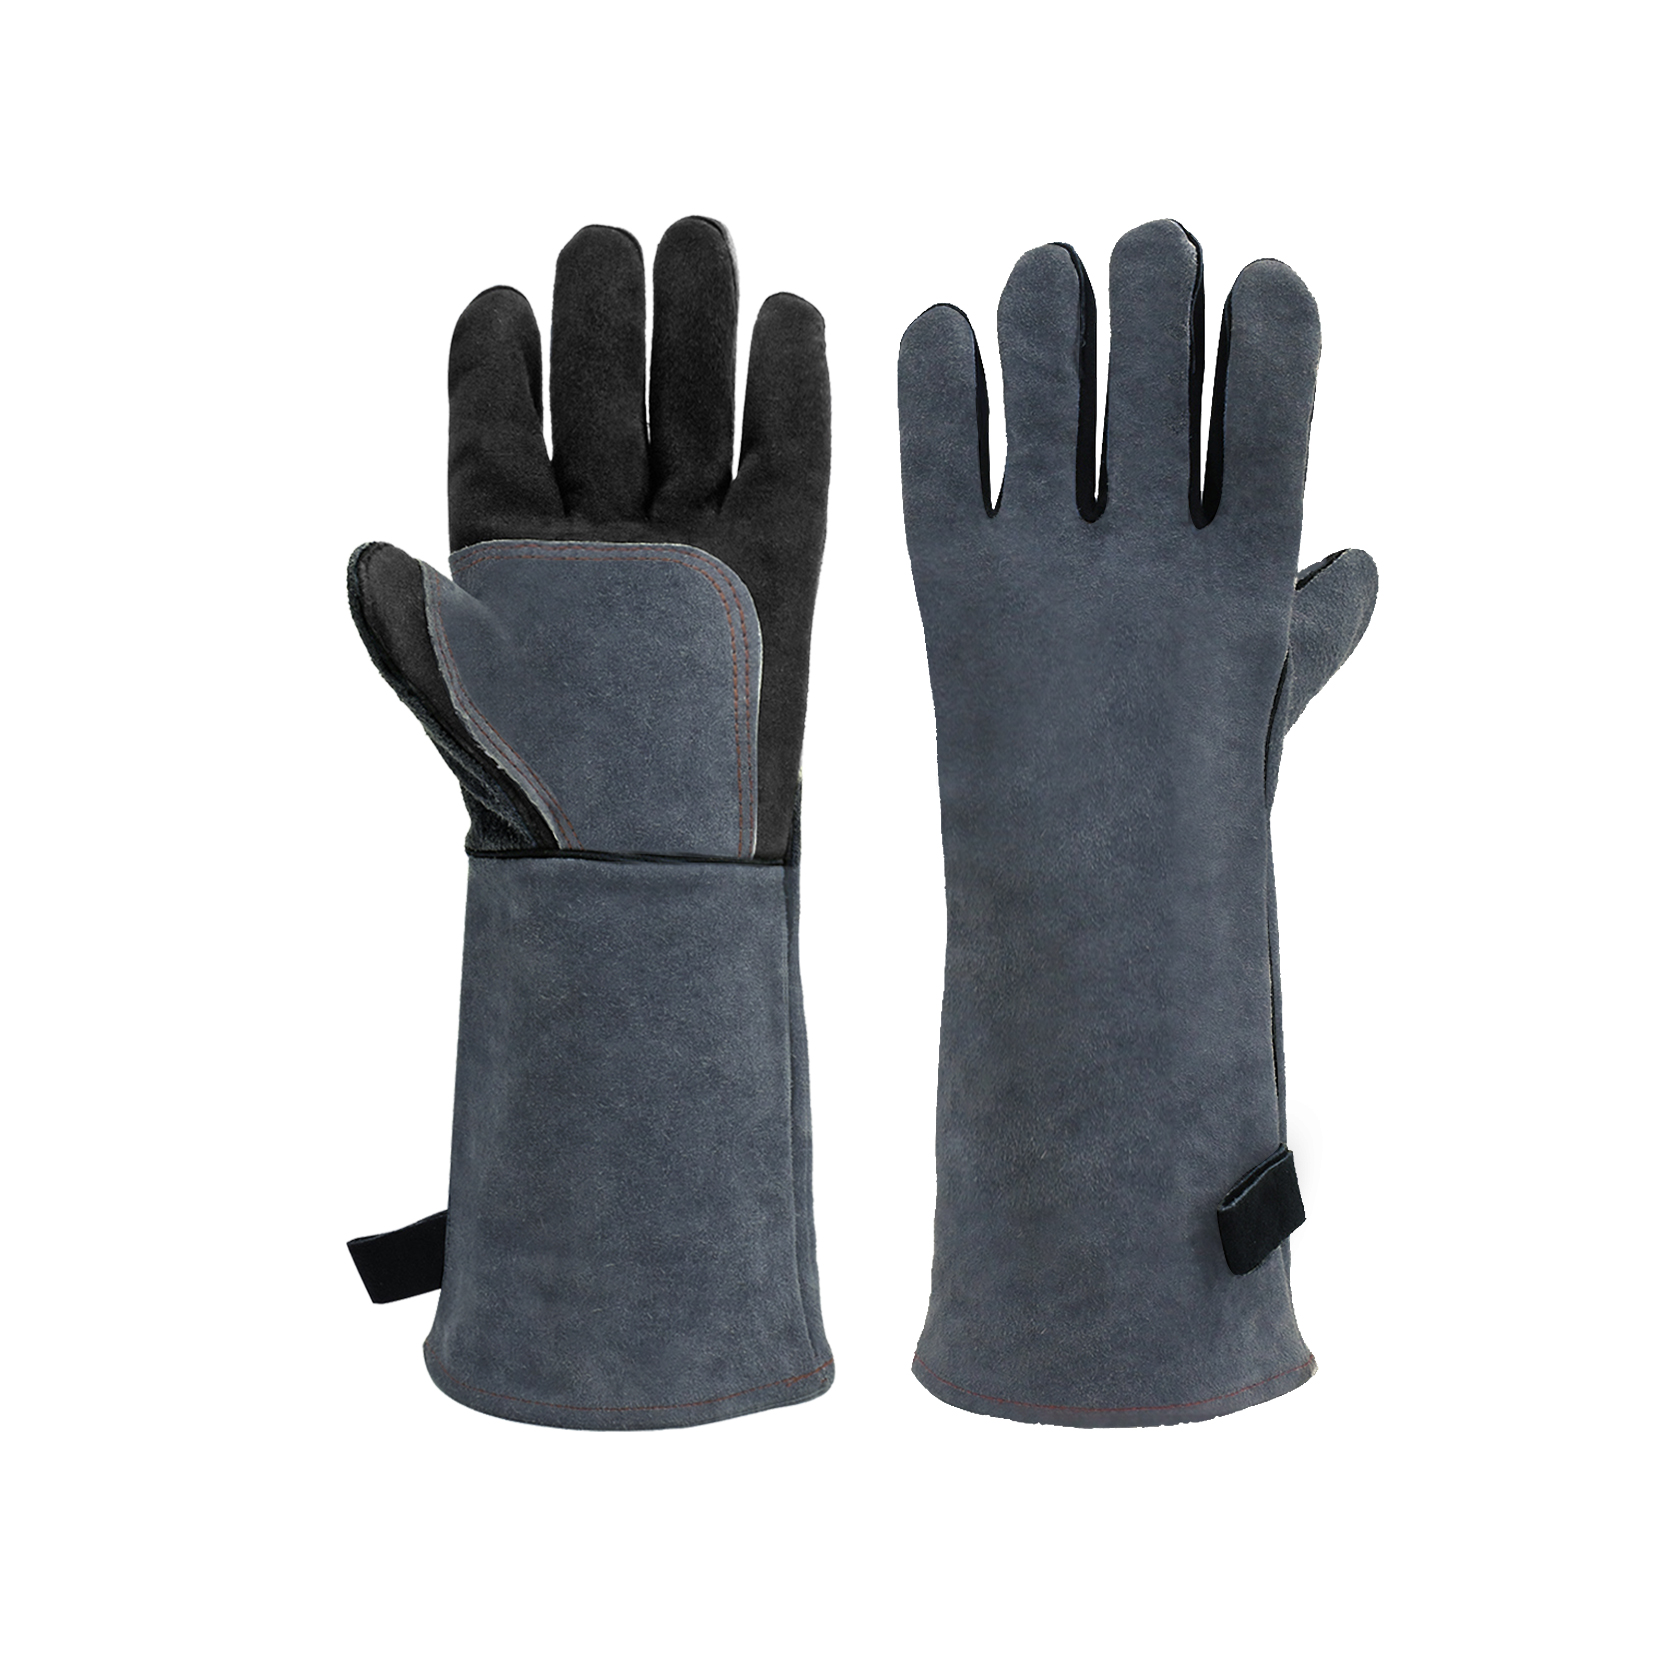 Long Leather Oven Heat Resistant BBQ Gloves High Temperature 800 Degrees Barbecue Grill Cow Split Leather Working Gloves